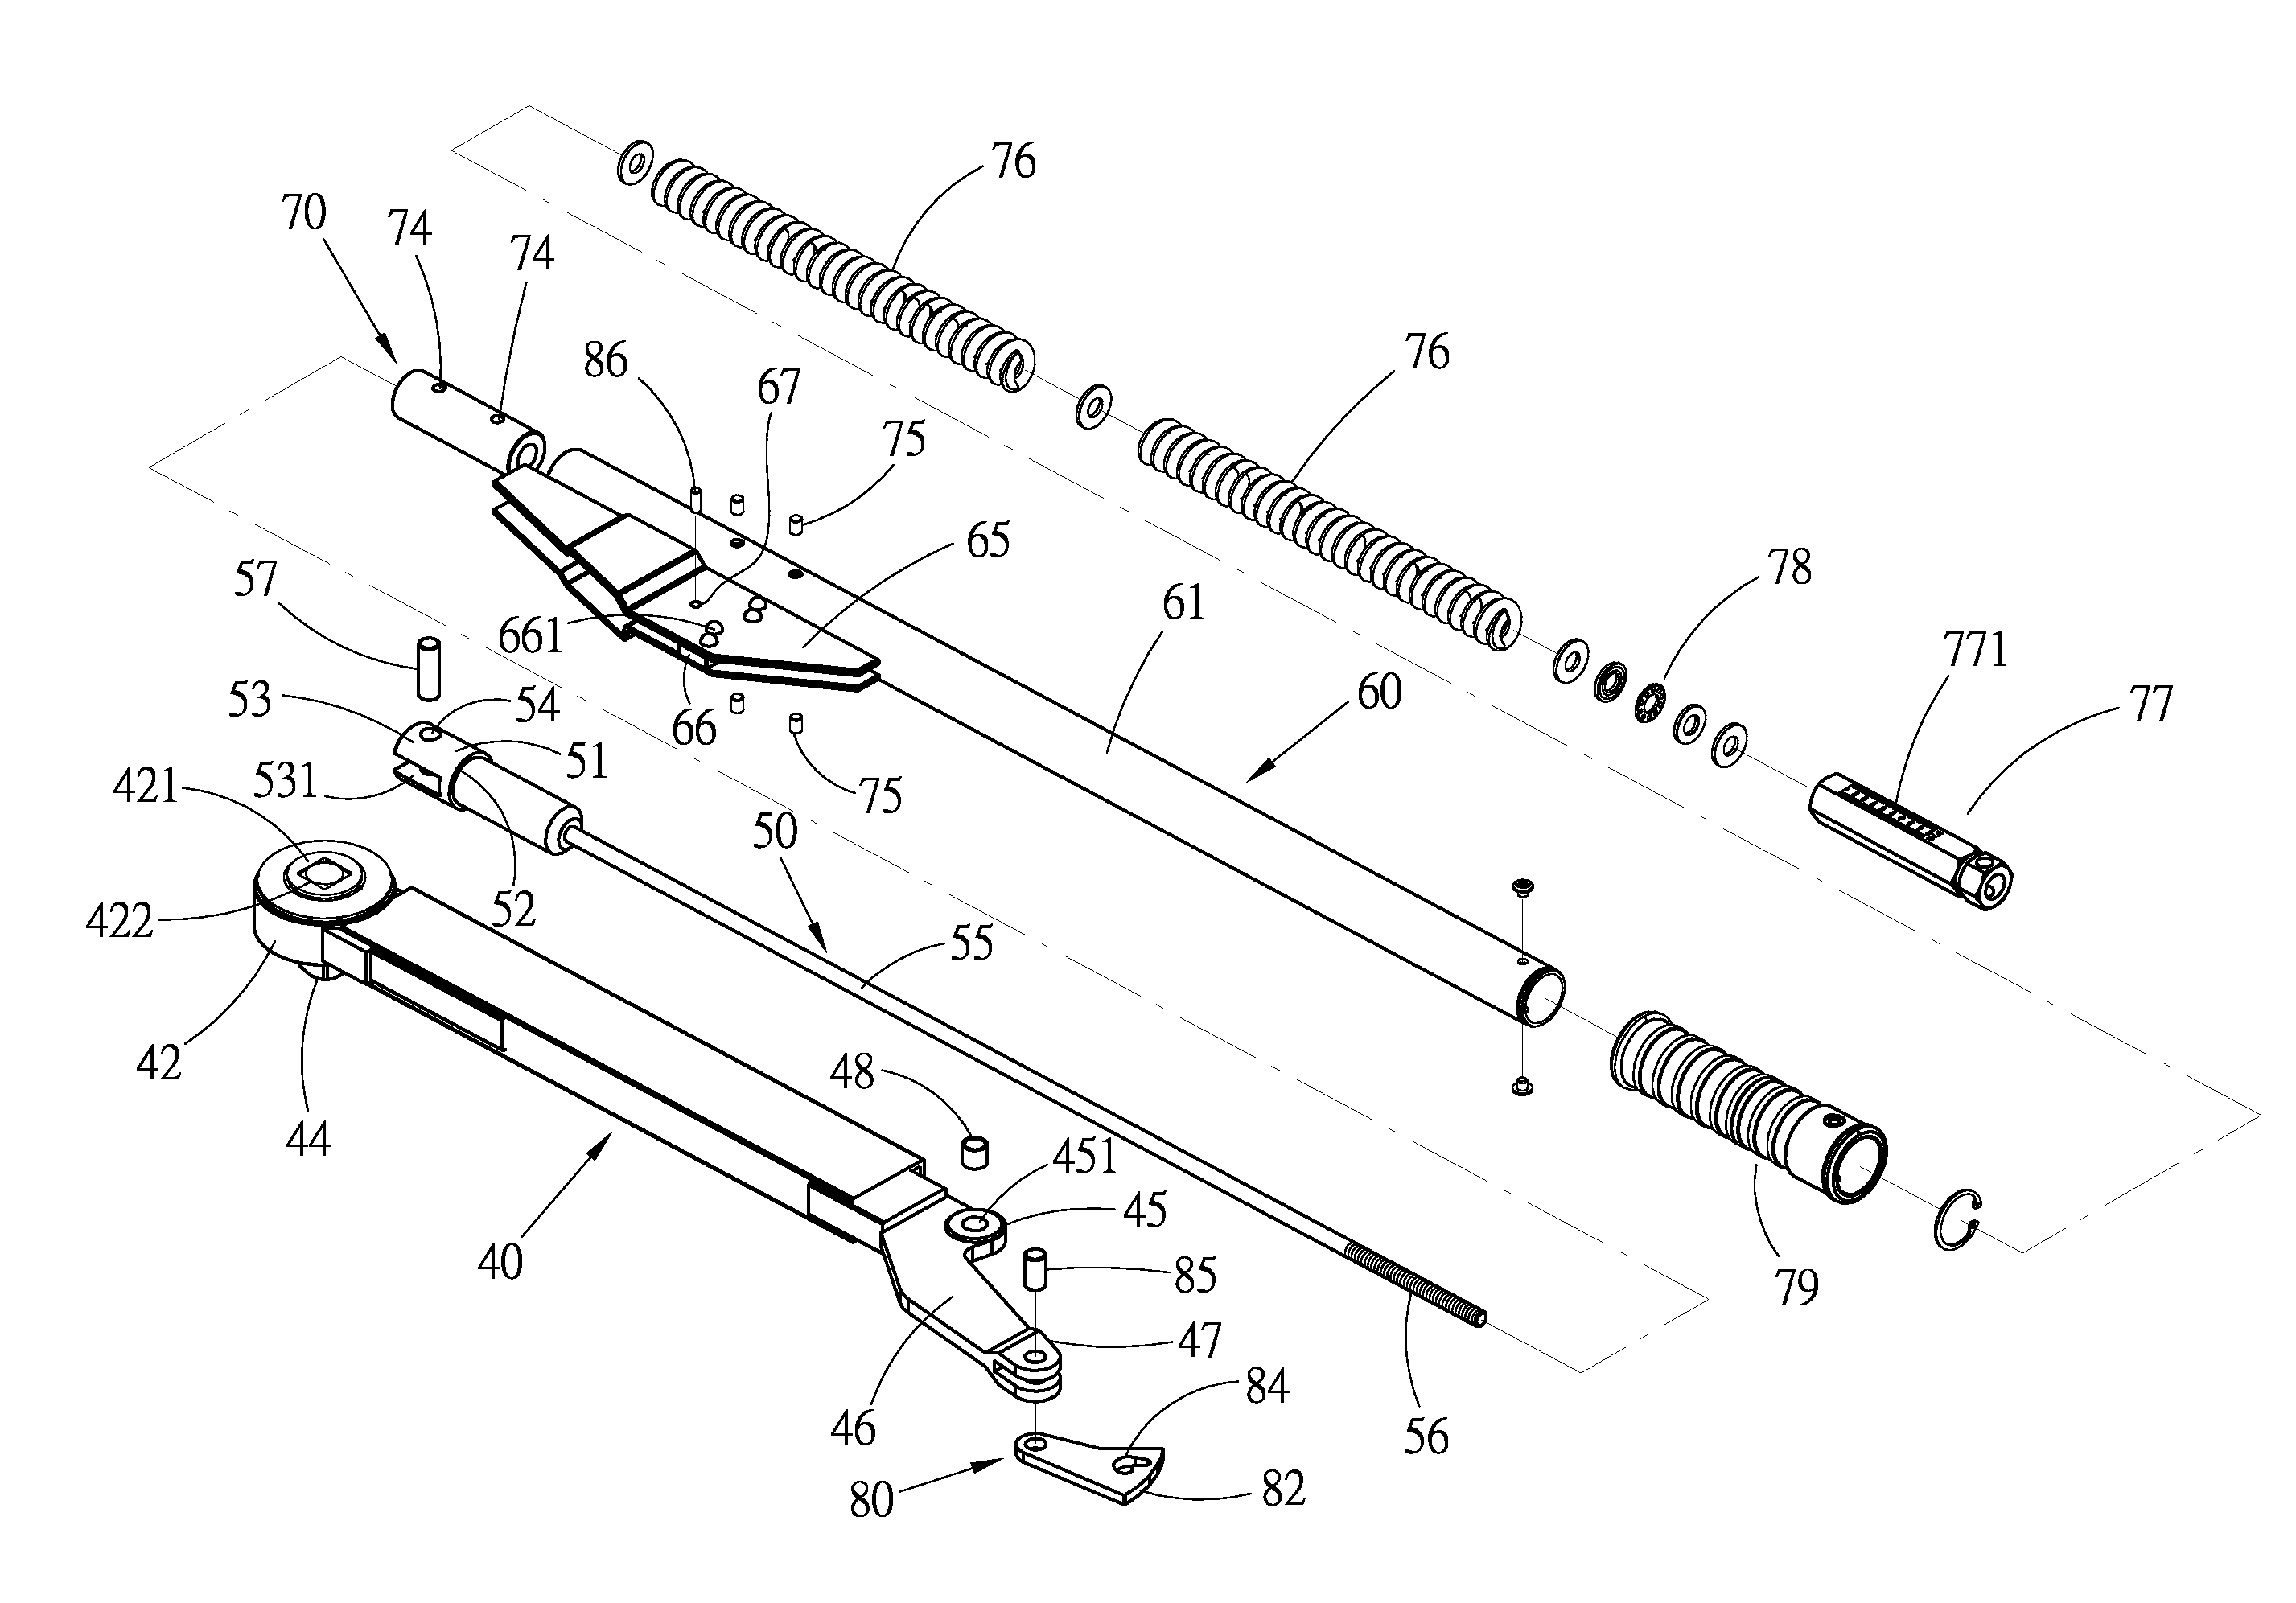 Collapsible torque wrench